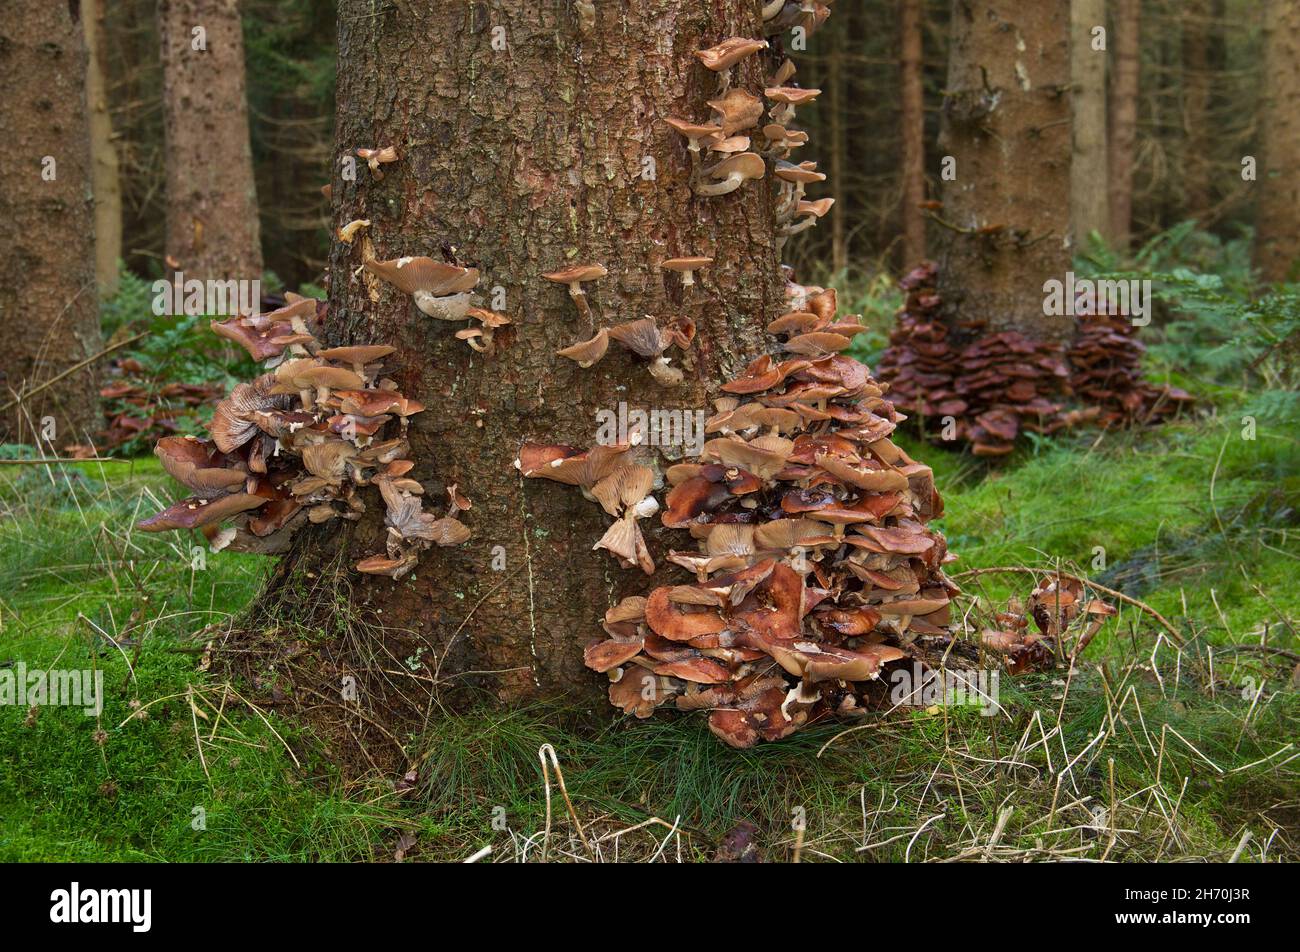 Honey mushroom, a destructive forest pathogen, on the trunk of a dying spruce tree Stock Photo